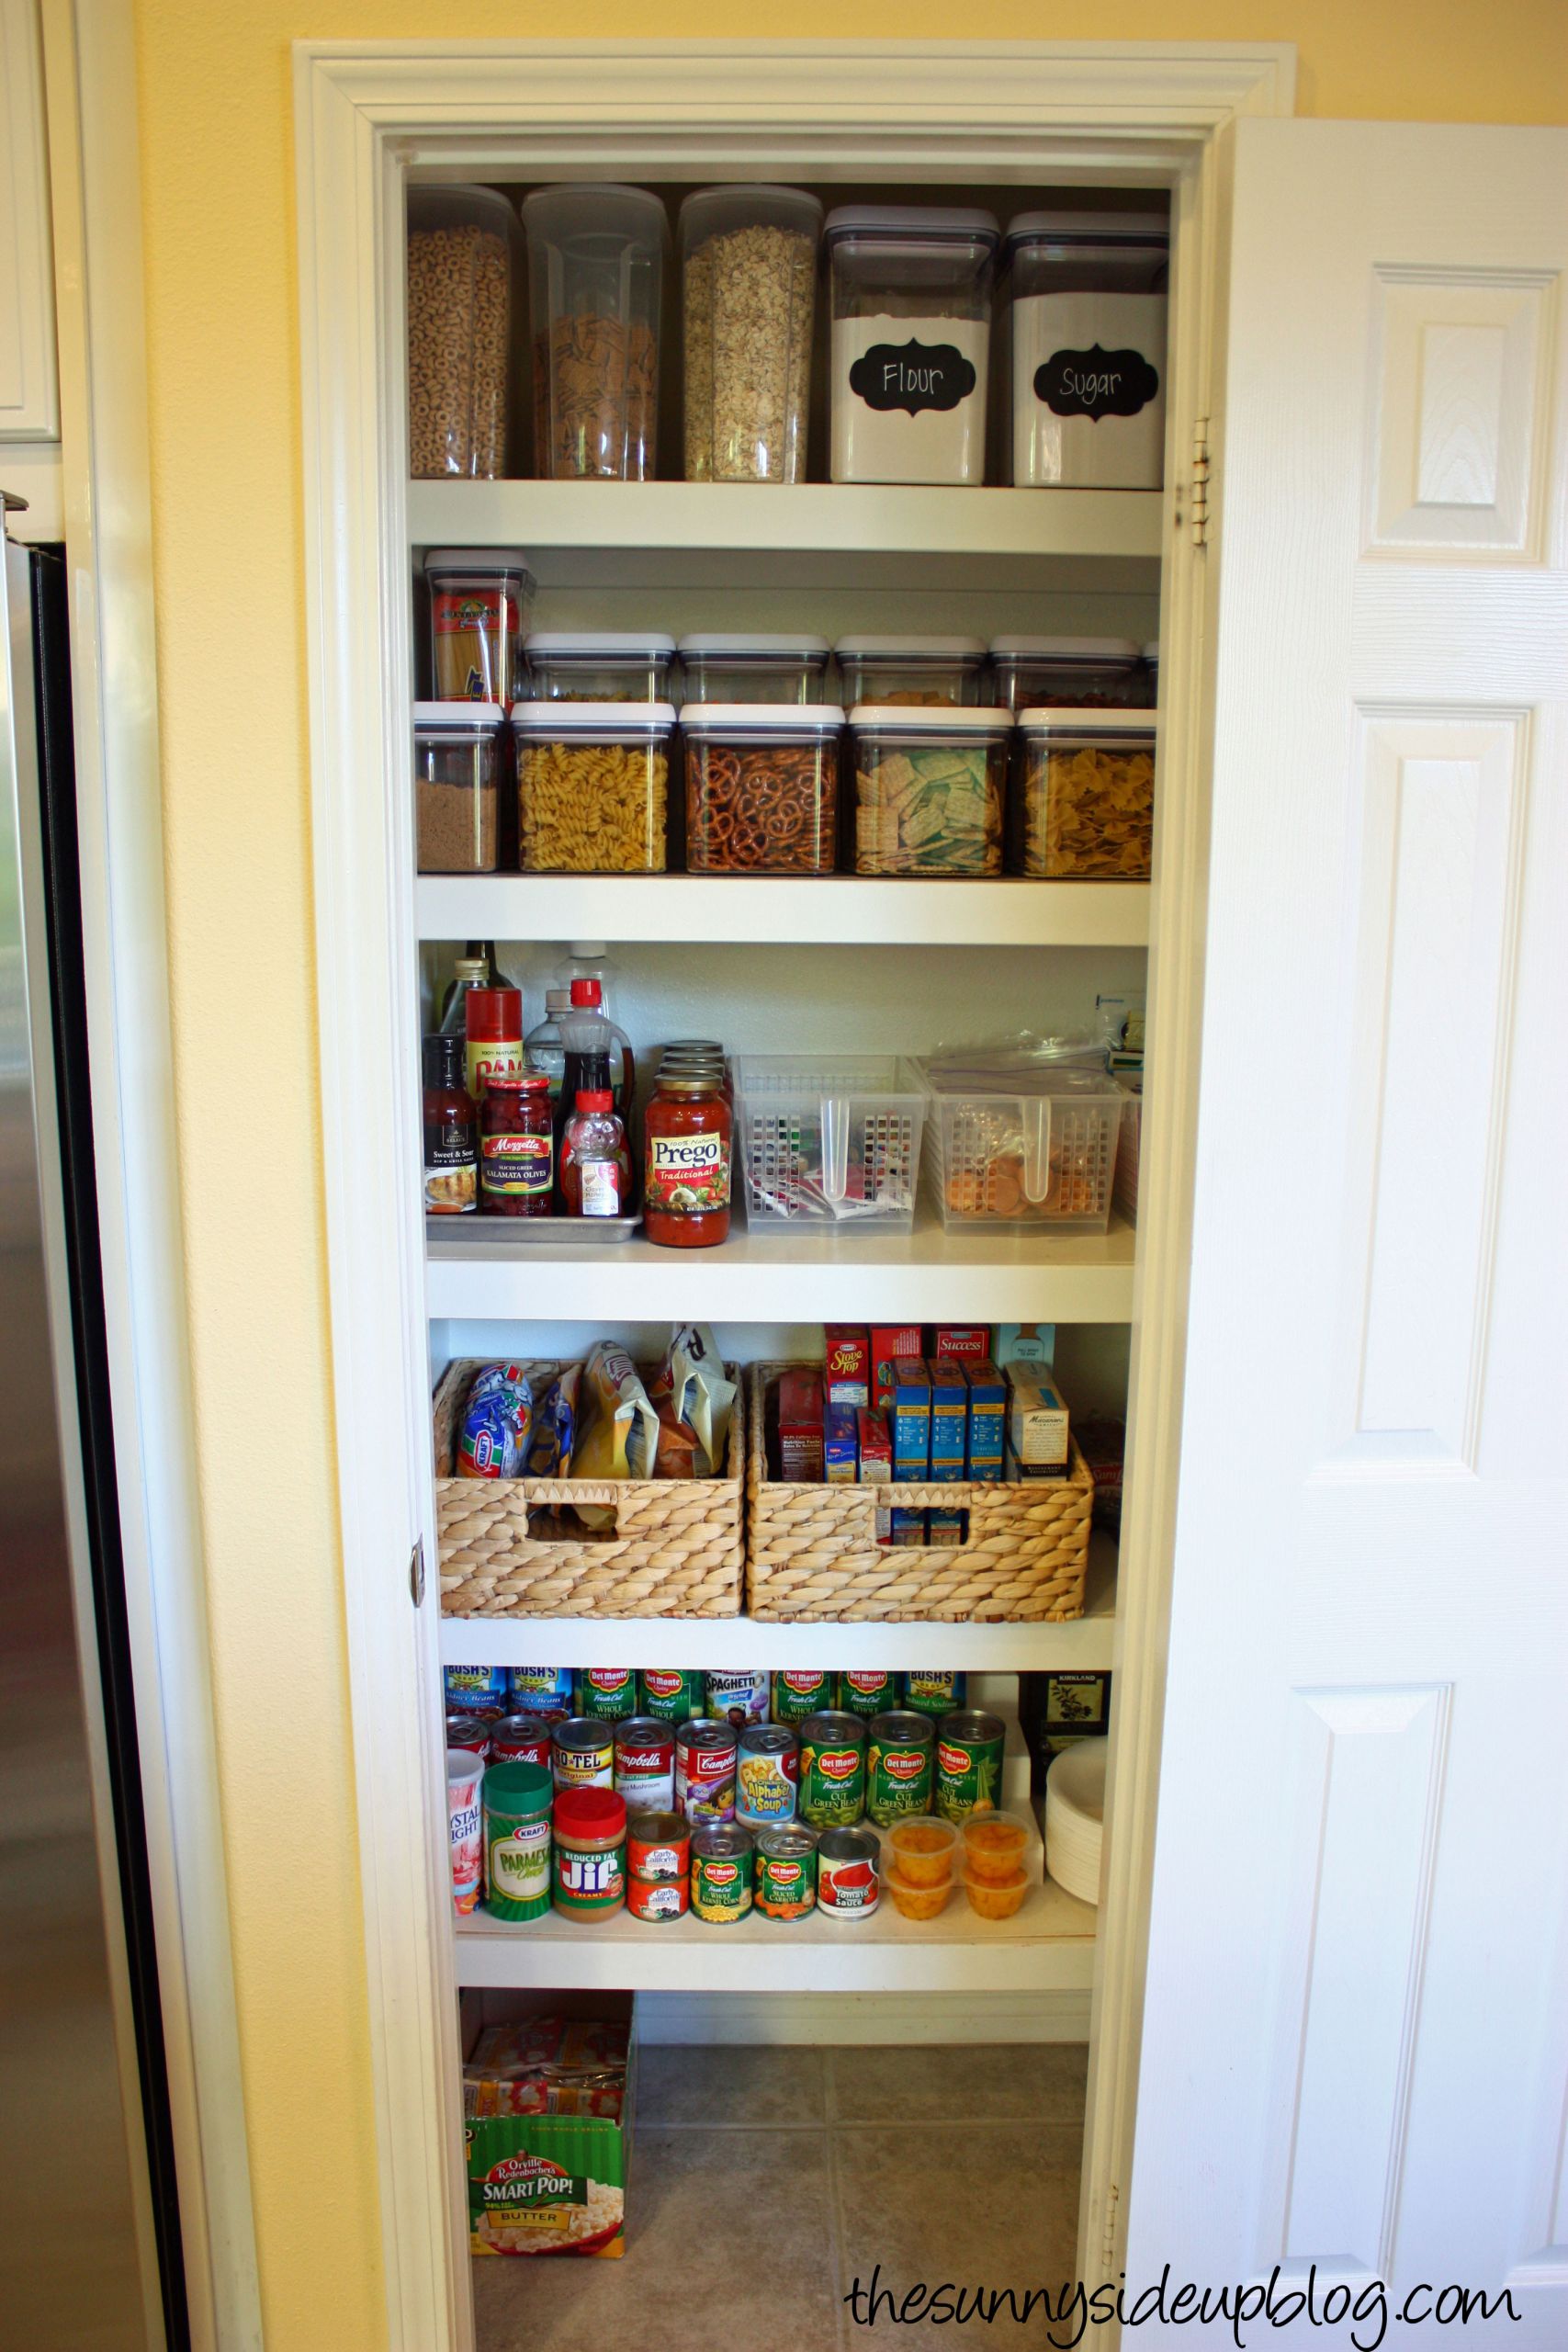 Kitchen Pantry organize Lovely Over 20 Ways to organize Your Home and Life the Sunny